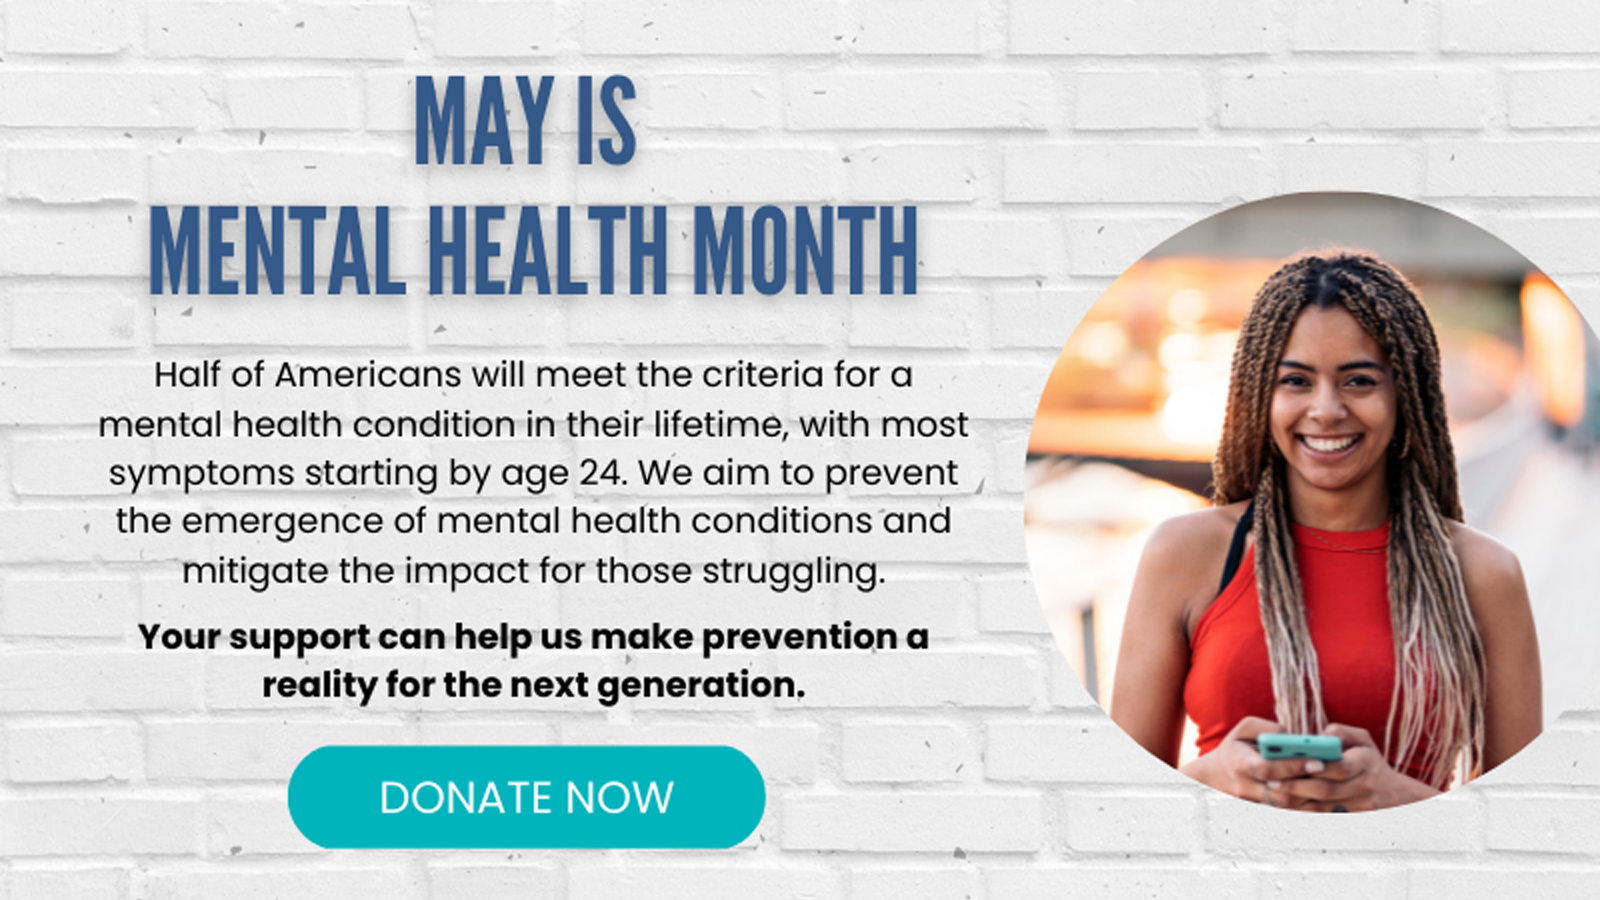 May is Mental Health Month - Donate Now